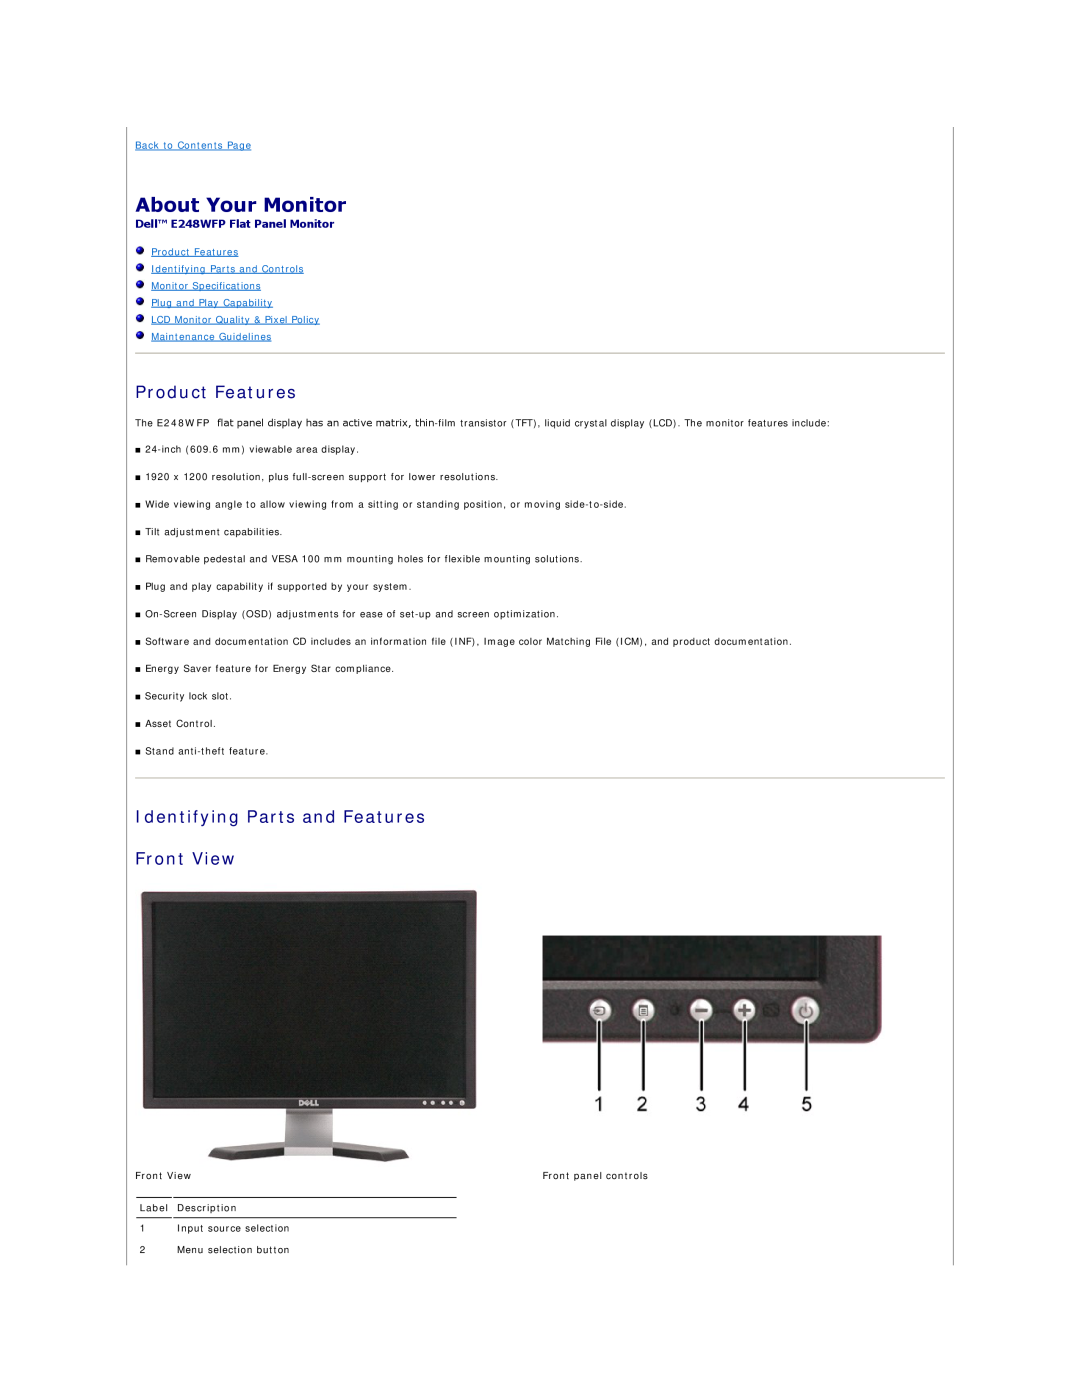 Dell E248WFP About Your Monitor, Product Features, Identifying Parts and Features Front View, Back to Contents Page 